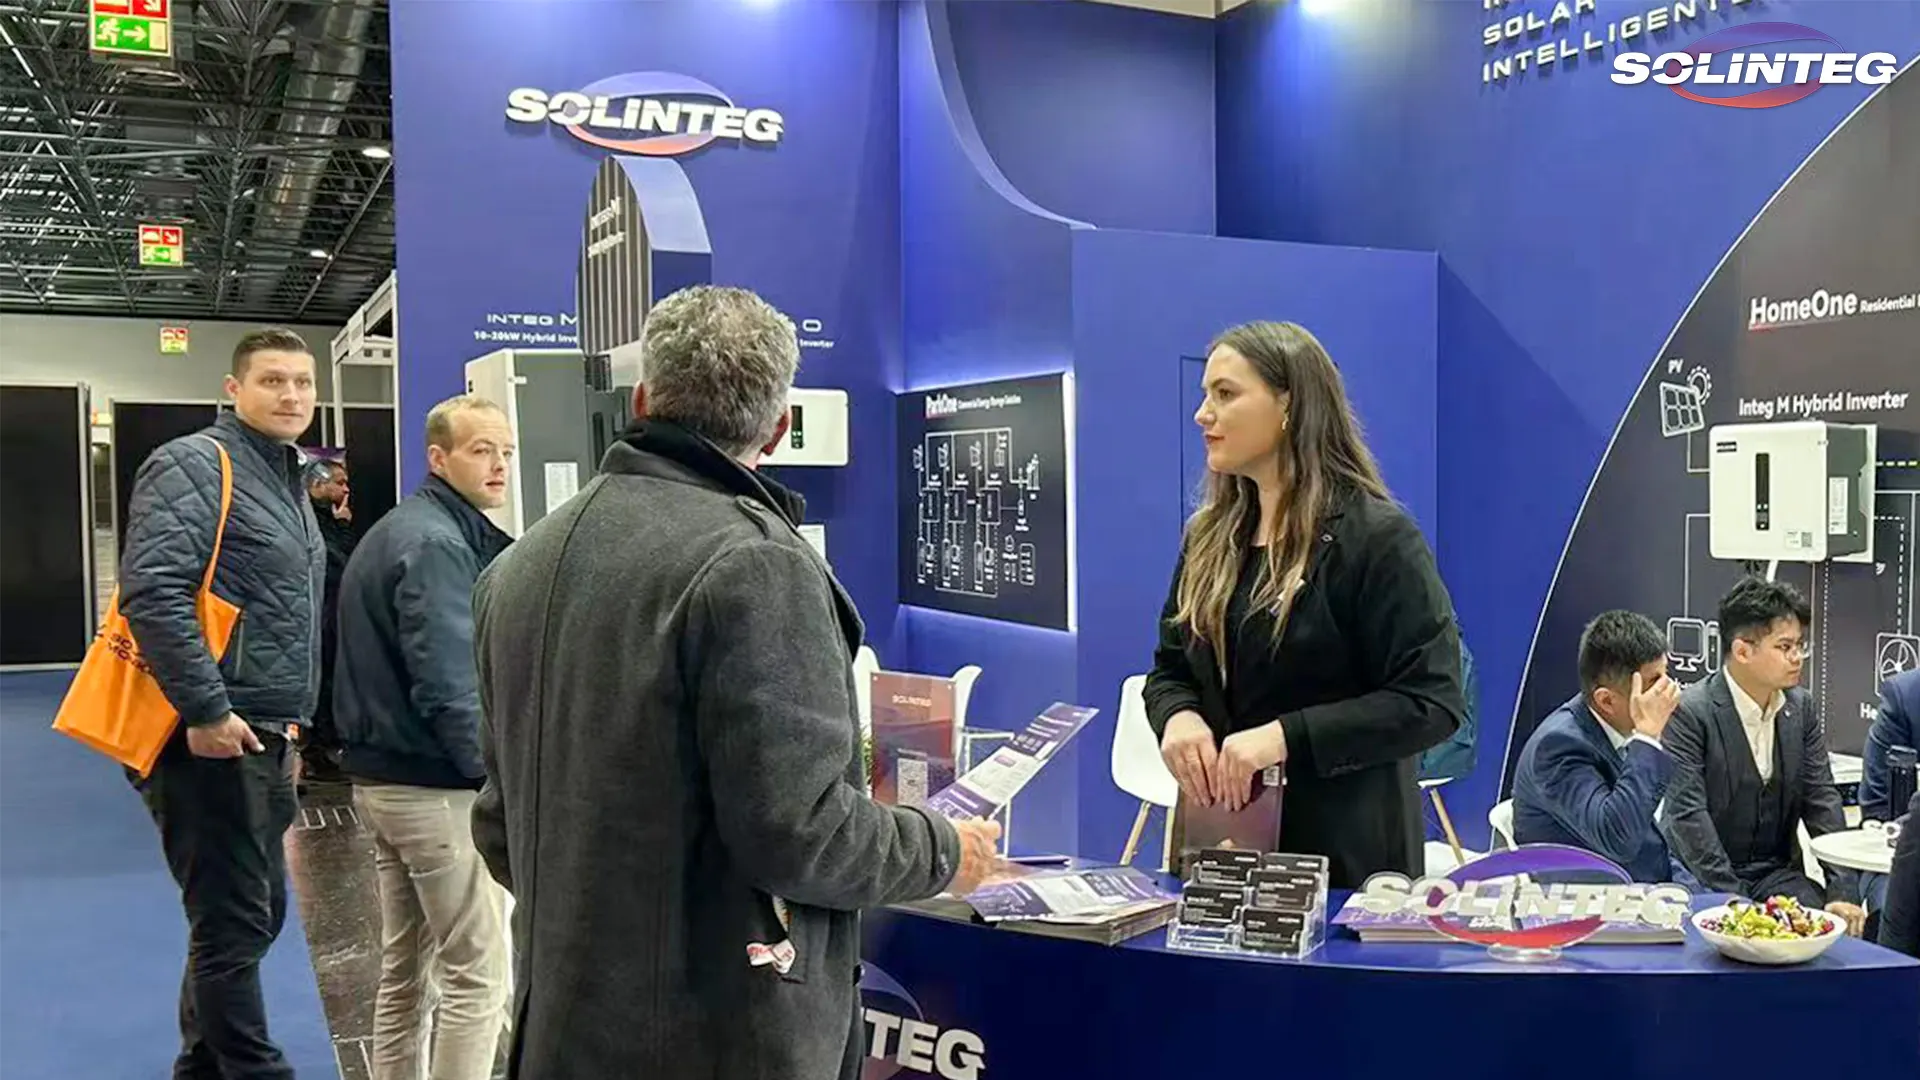 Solinteg debut at Solar Solutions Dusseldorf 2023, showcasing its latest PV storage technology for Central European market